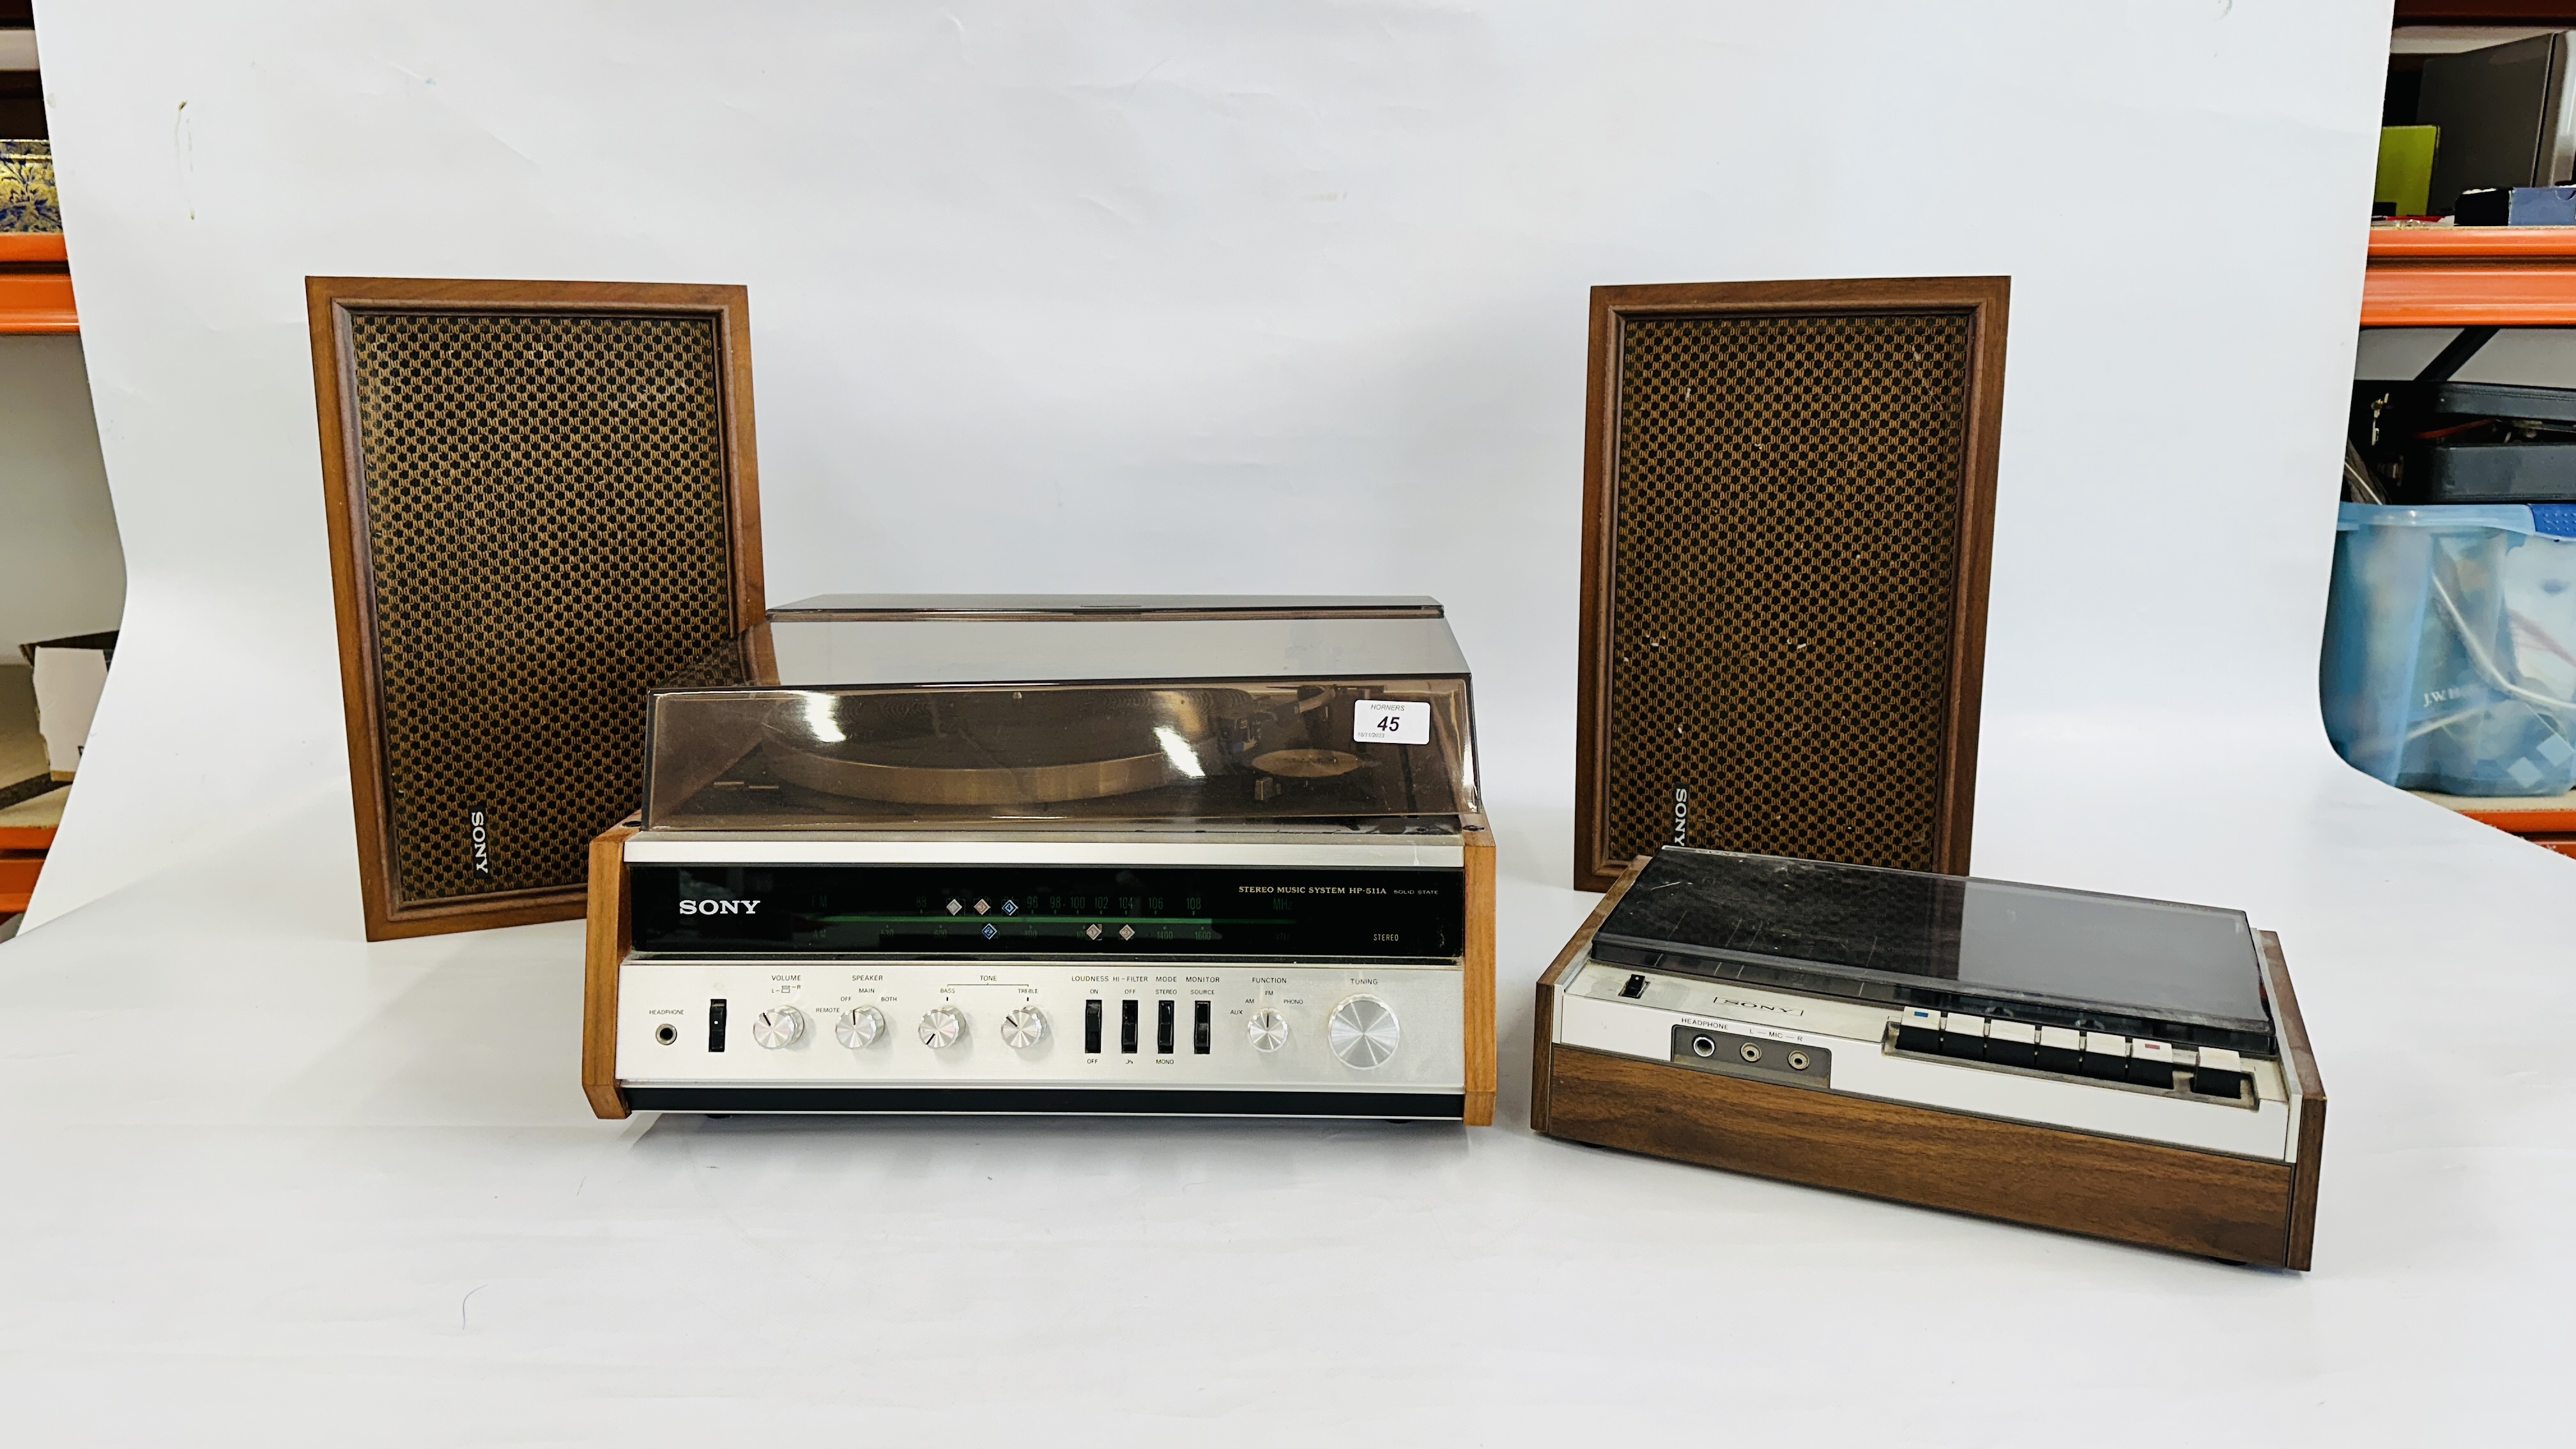 RETRO SONY STEREO MUSIC SYSTEM MODEL HP-511A COMPLETE WITH SONY SS-510 SPEAKER SYSTEM AND SONY